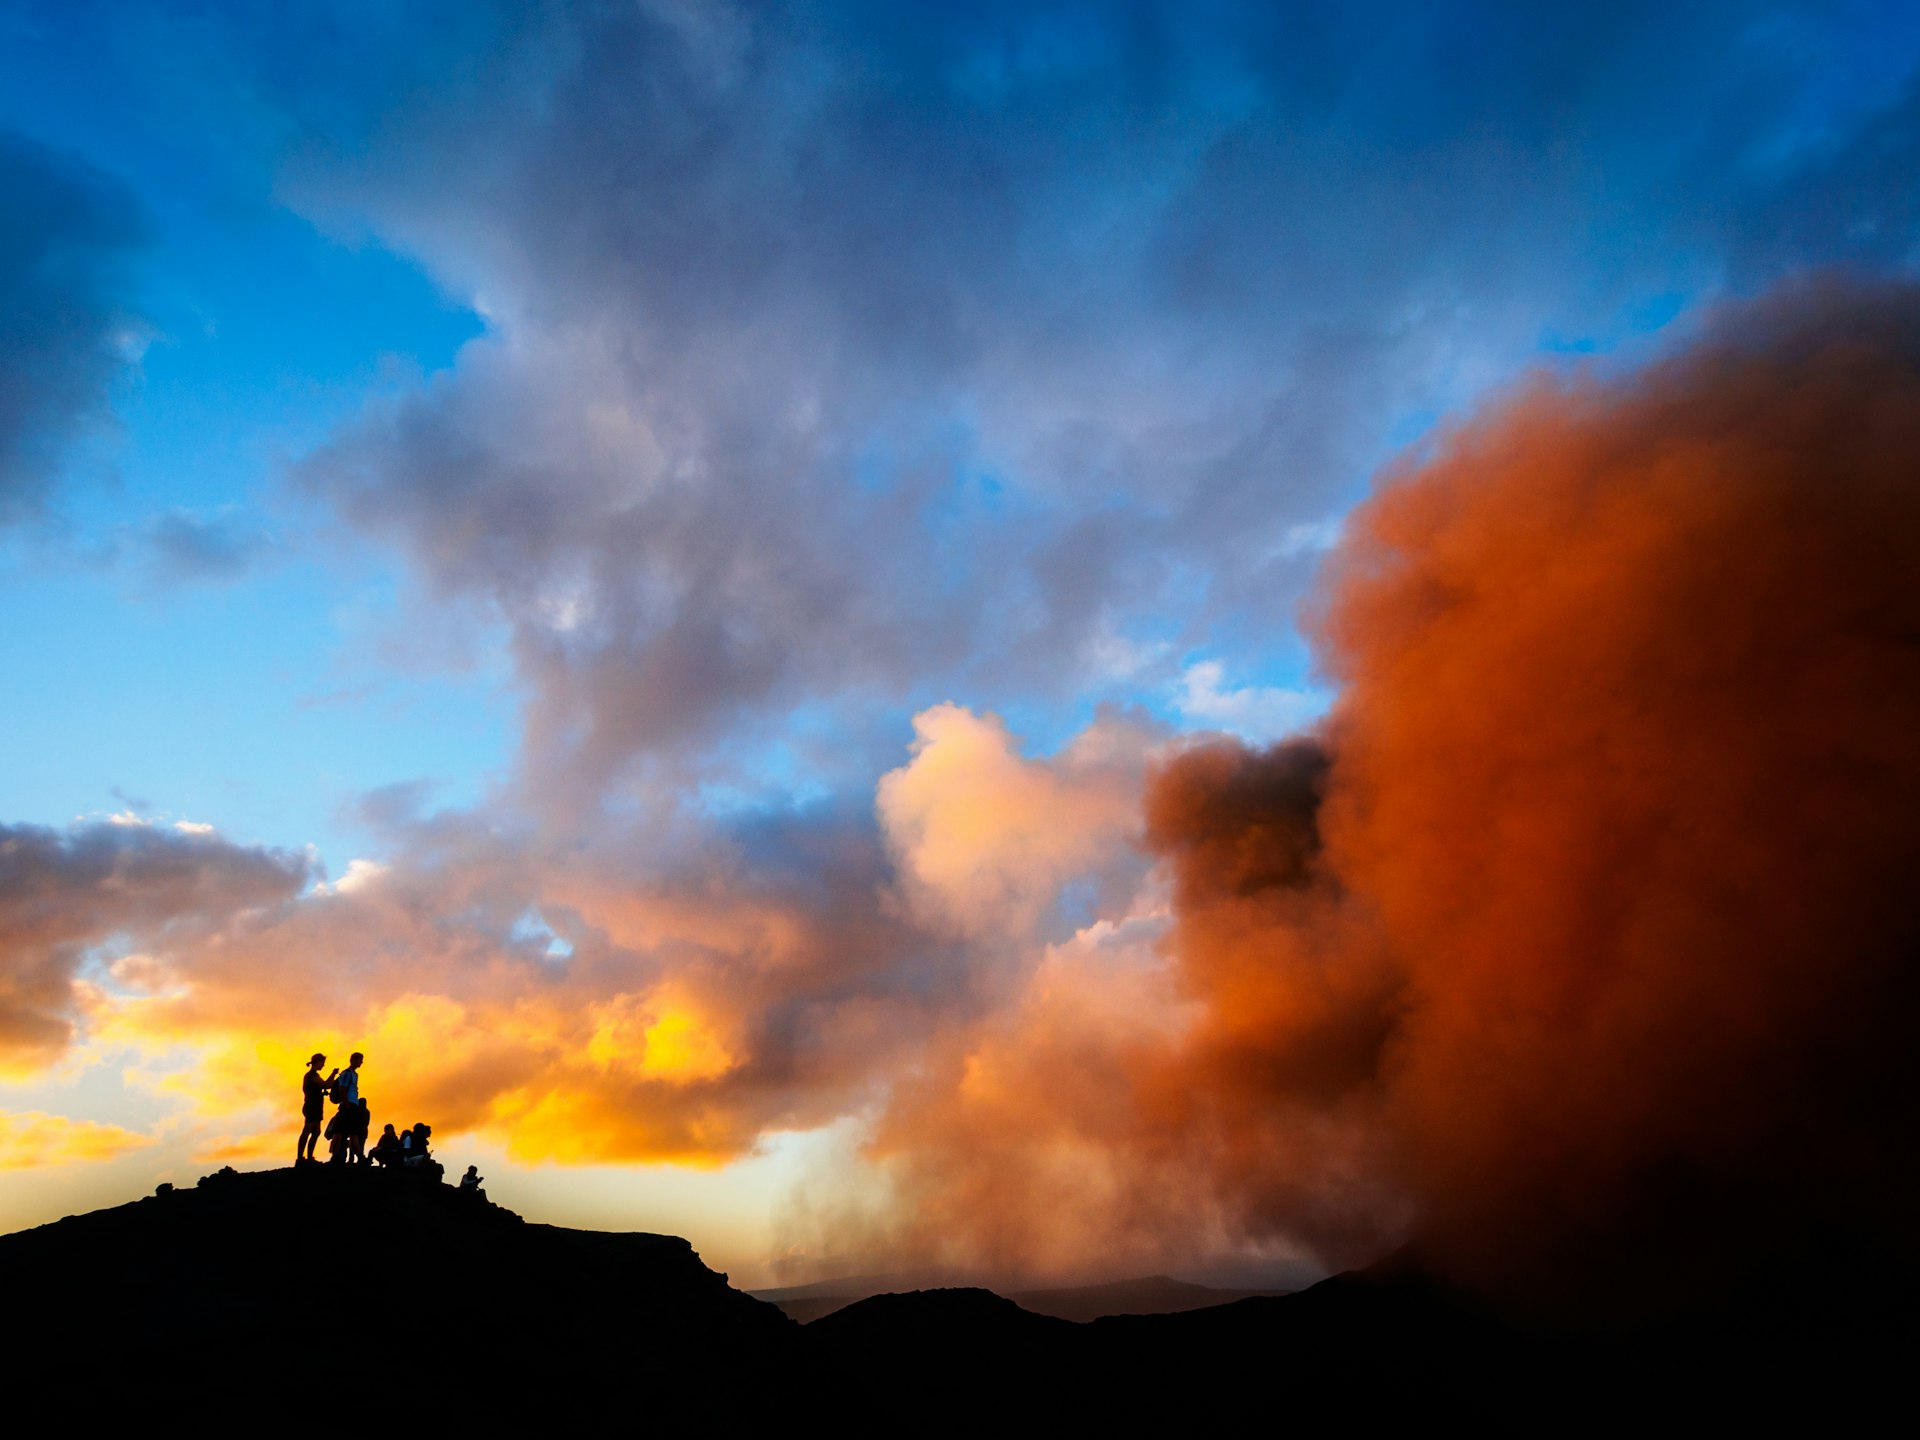 People in silhouette stand at the edge of a volcano crater spewing clouds of dust and smoke against a sunset